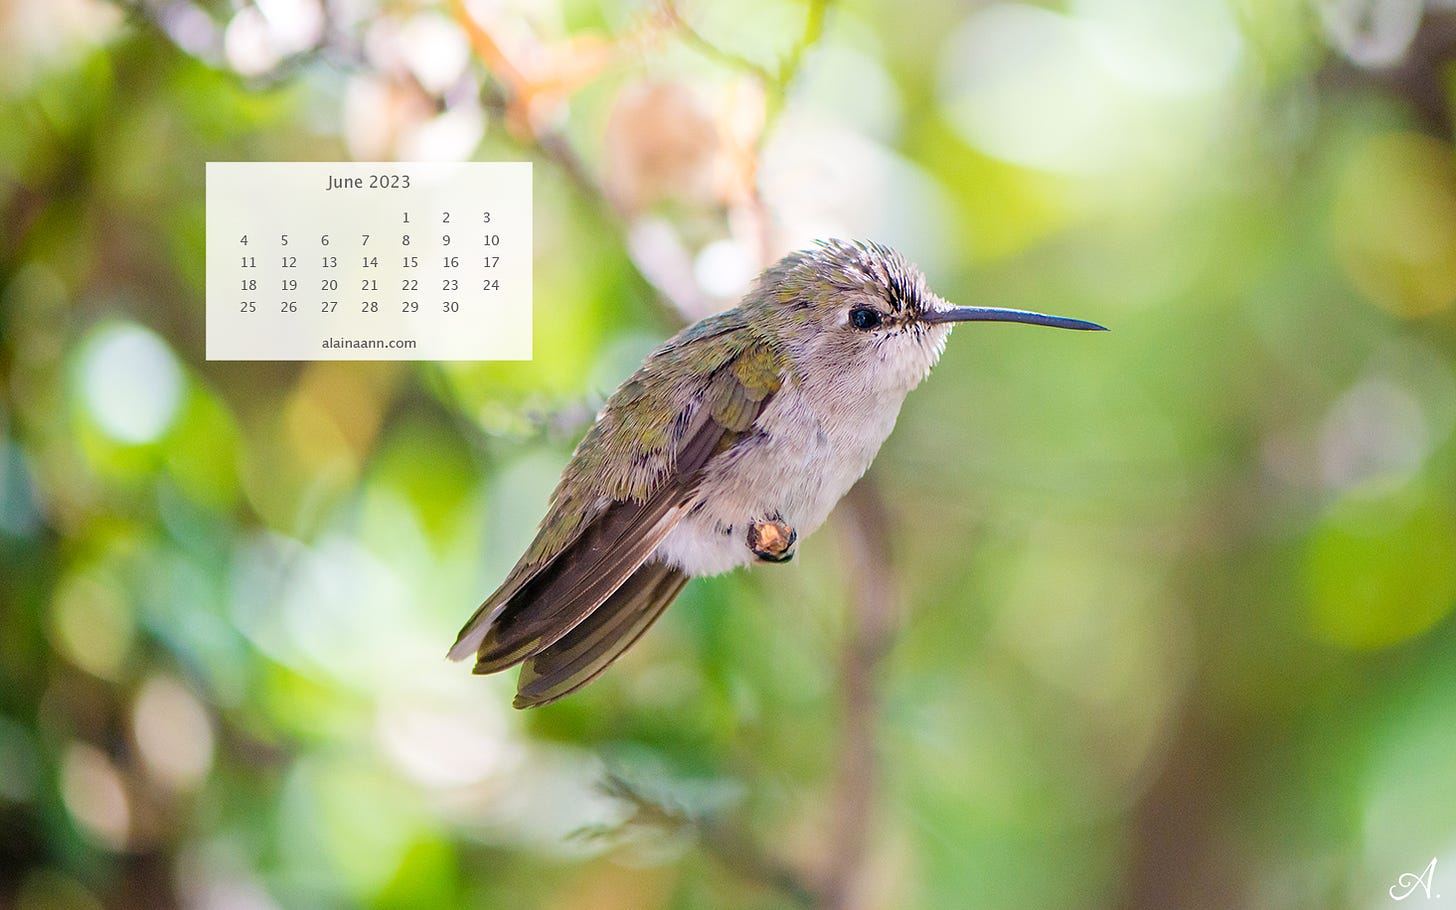 Close-up of a baby hummingbird perched on a small branch. A simple calendar overlay for the month of June is in the left corner.